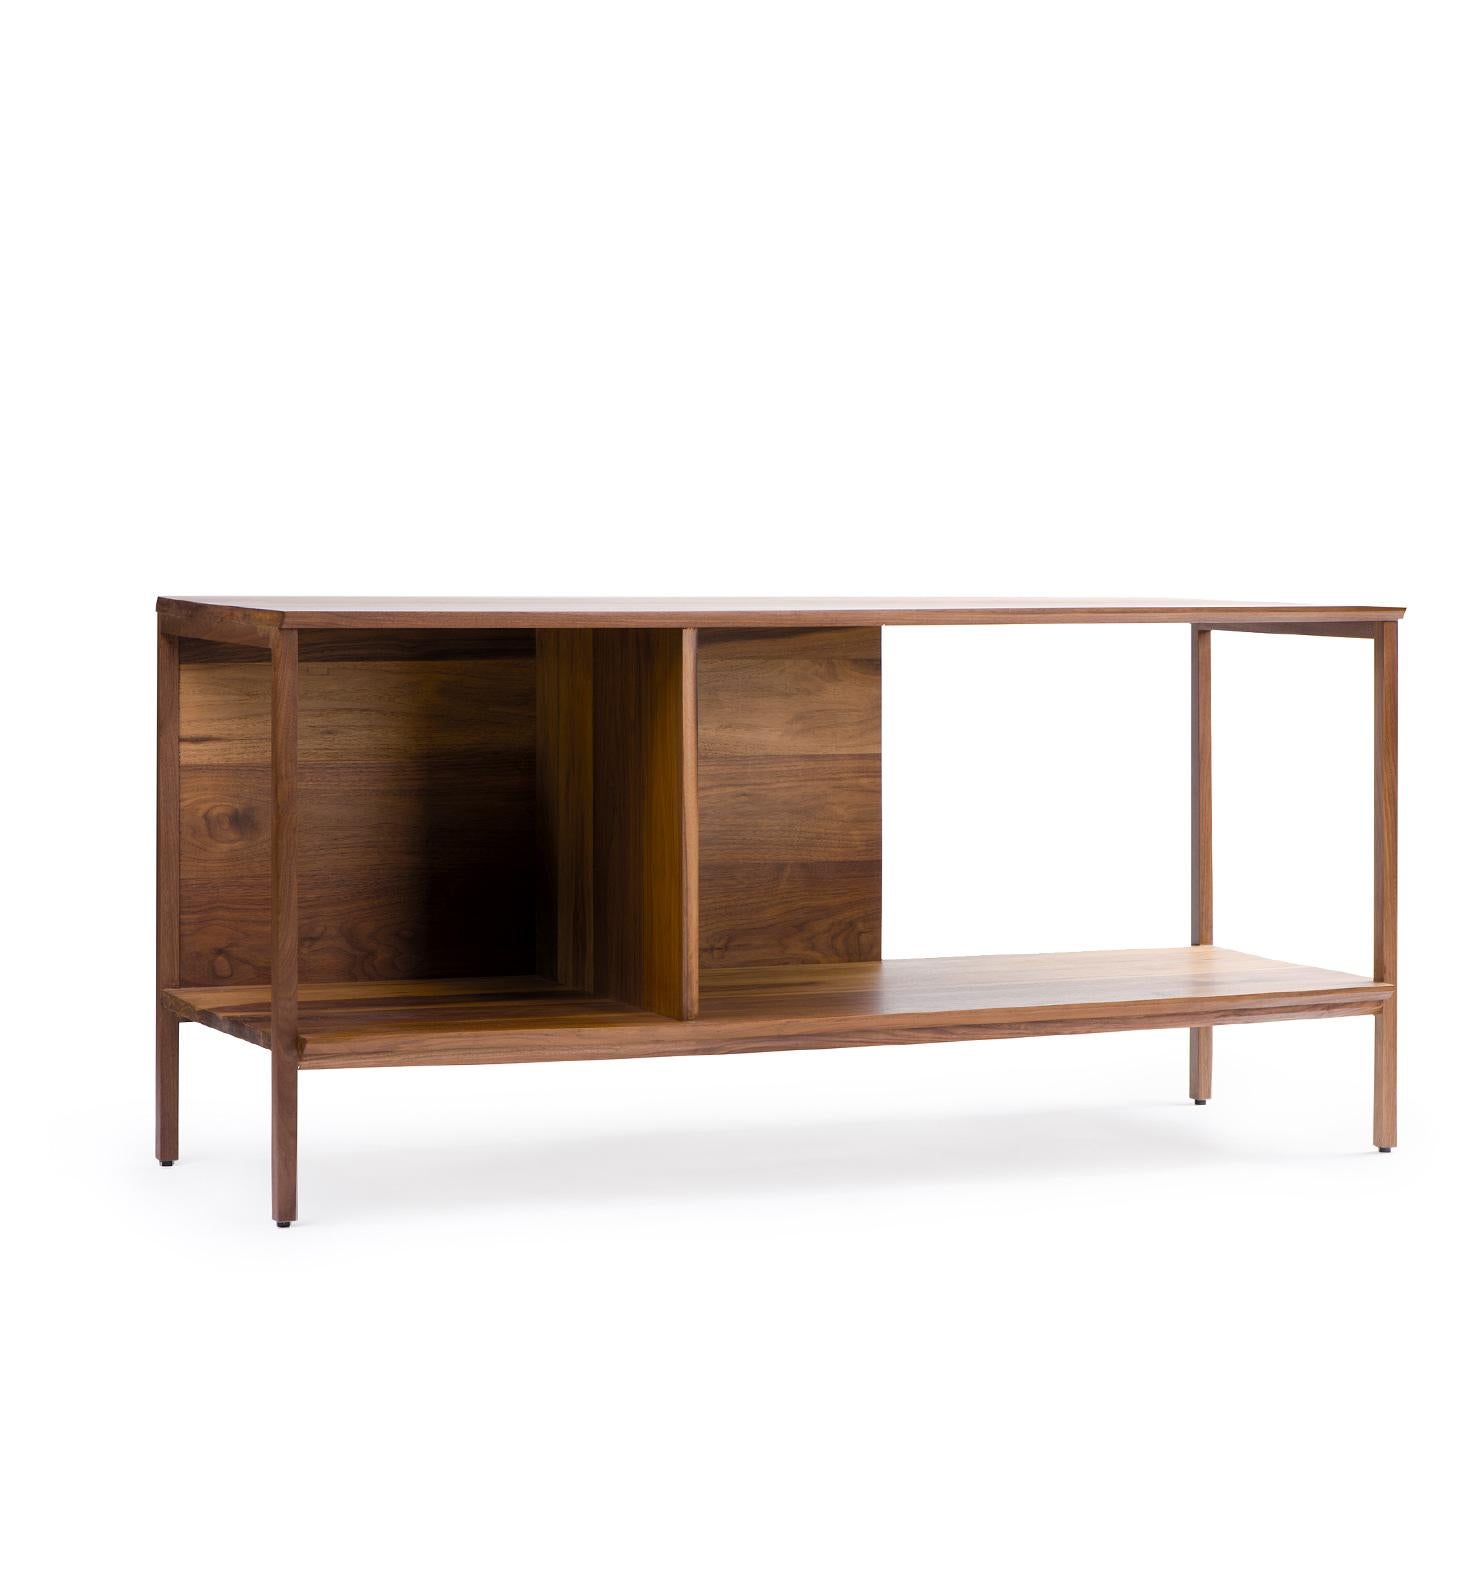 Consola Dedo, Mexican Contemporary Console by Emiliano Molina for CUCHARA

One of the main pieces of the collection. This furniture allows you to appreciate its woodwork from every angle. Produced in three different types of wood: tzalam, walnut